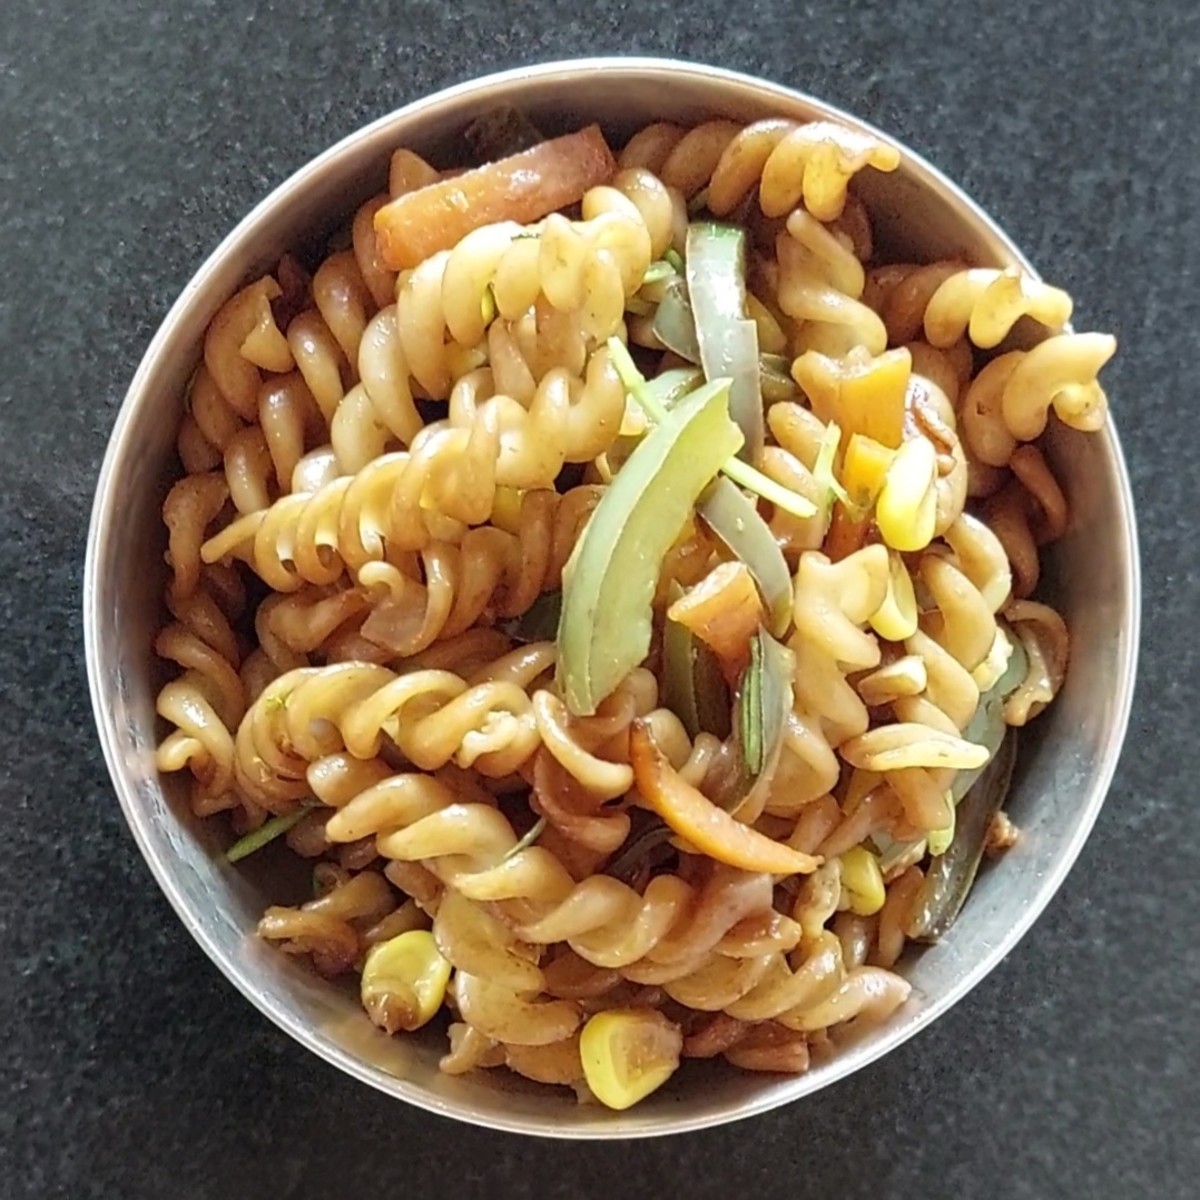 This spicy pasta dish is easy to prepare